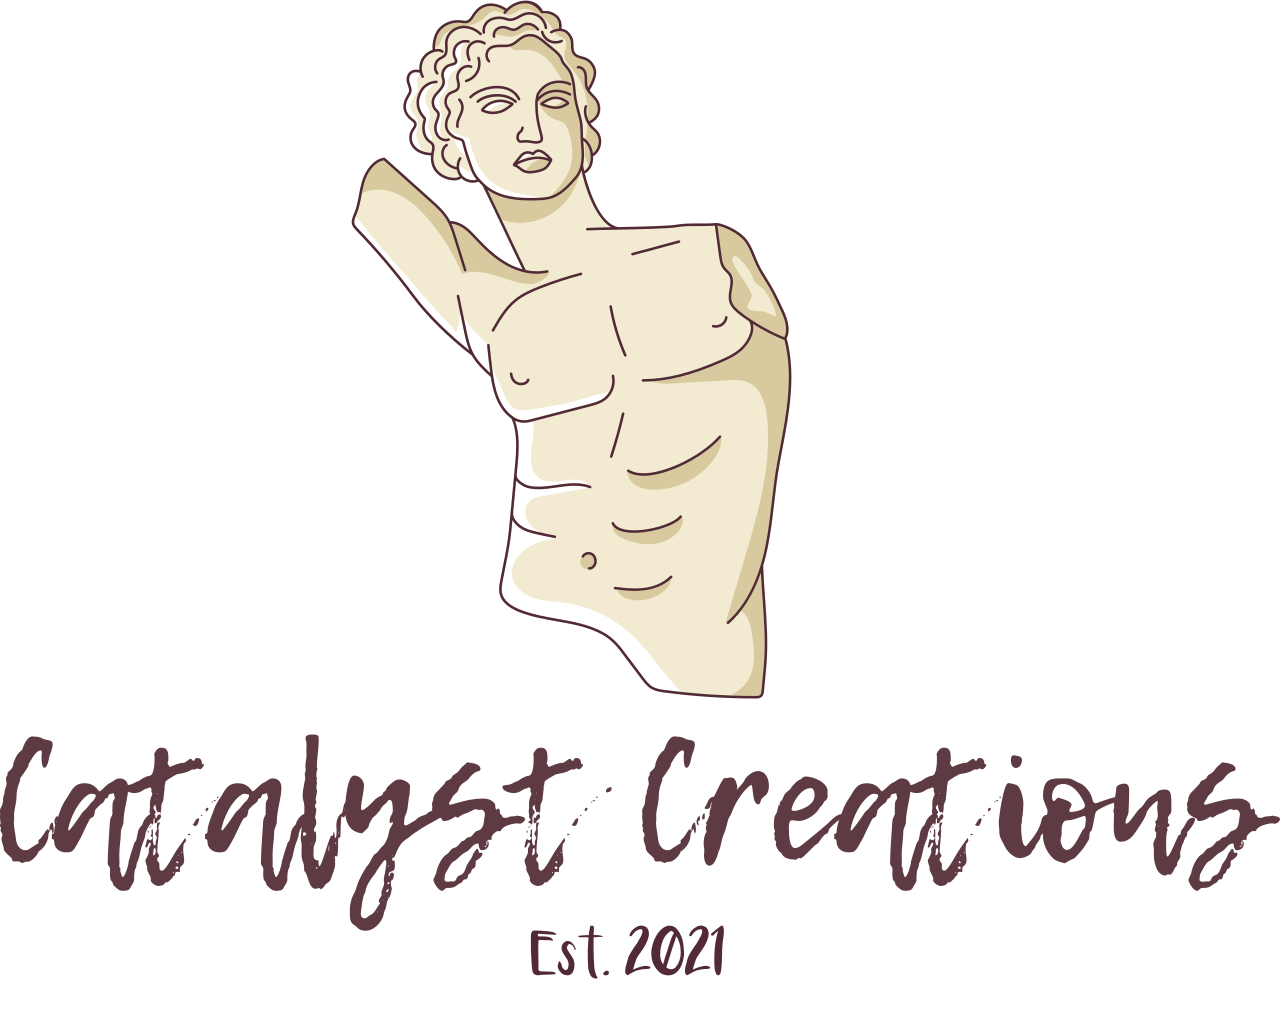 Catalyst Creations's web page